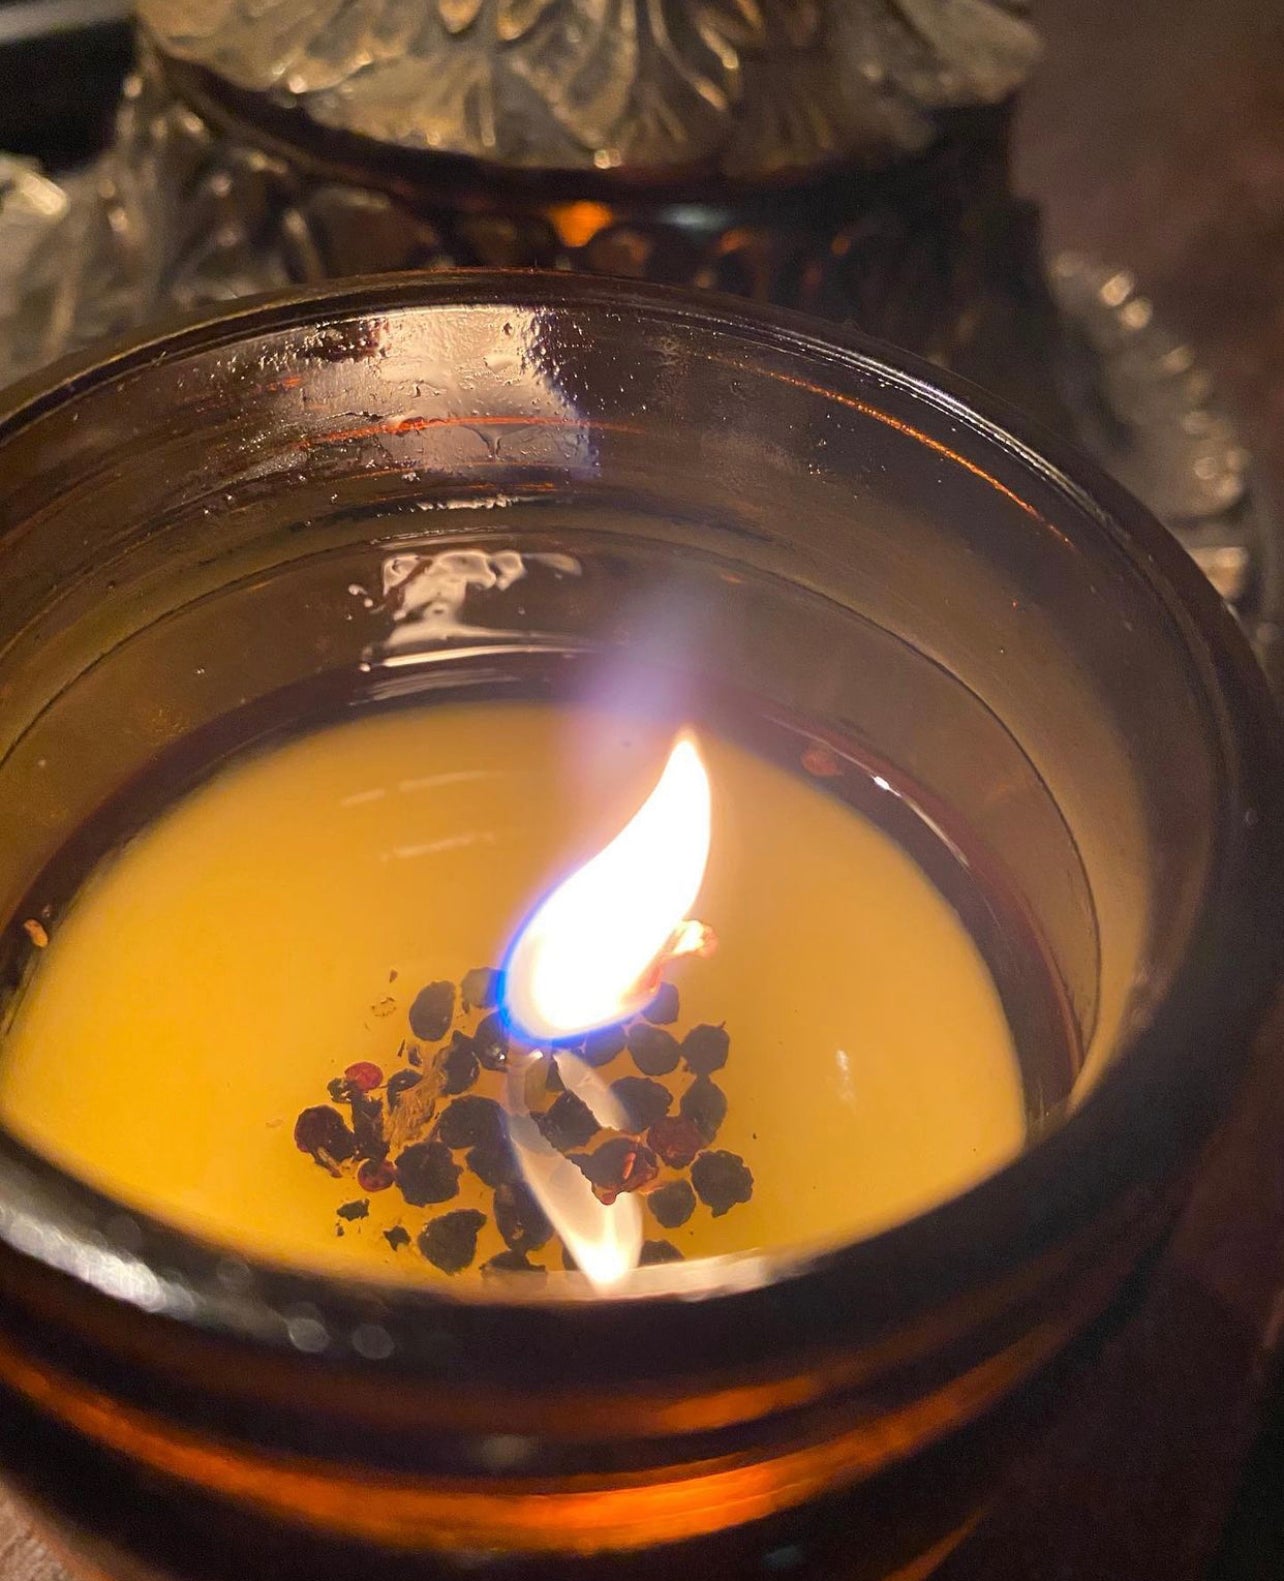 Thieves Oil Candle Made with beeswax and essential oils.